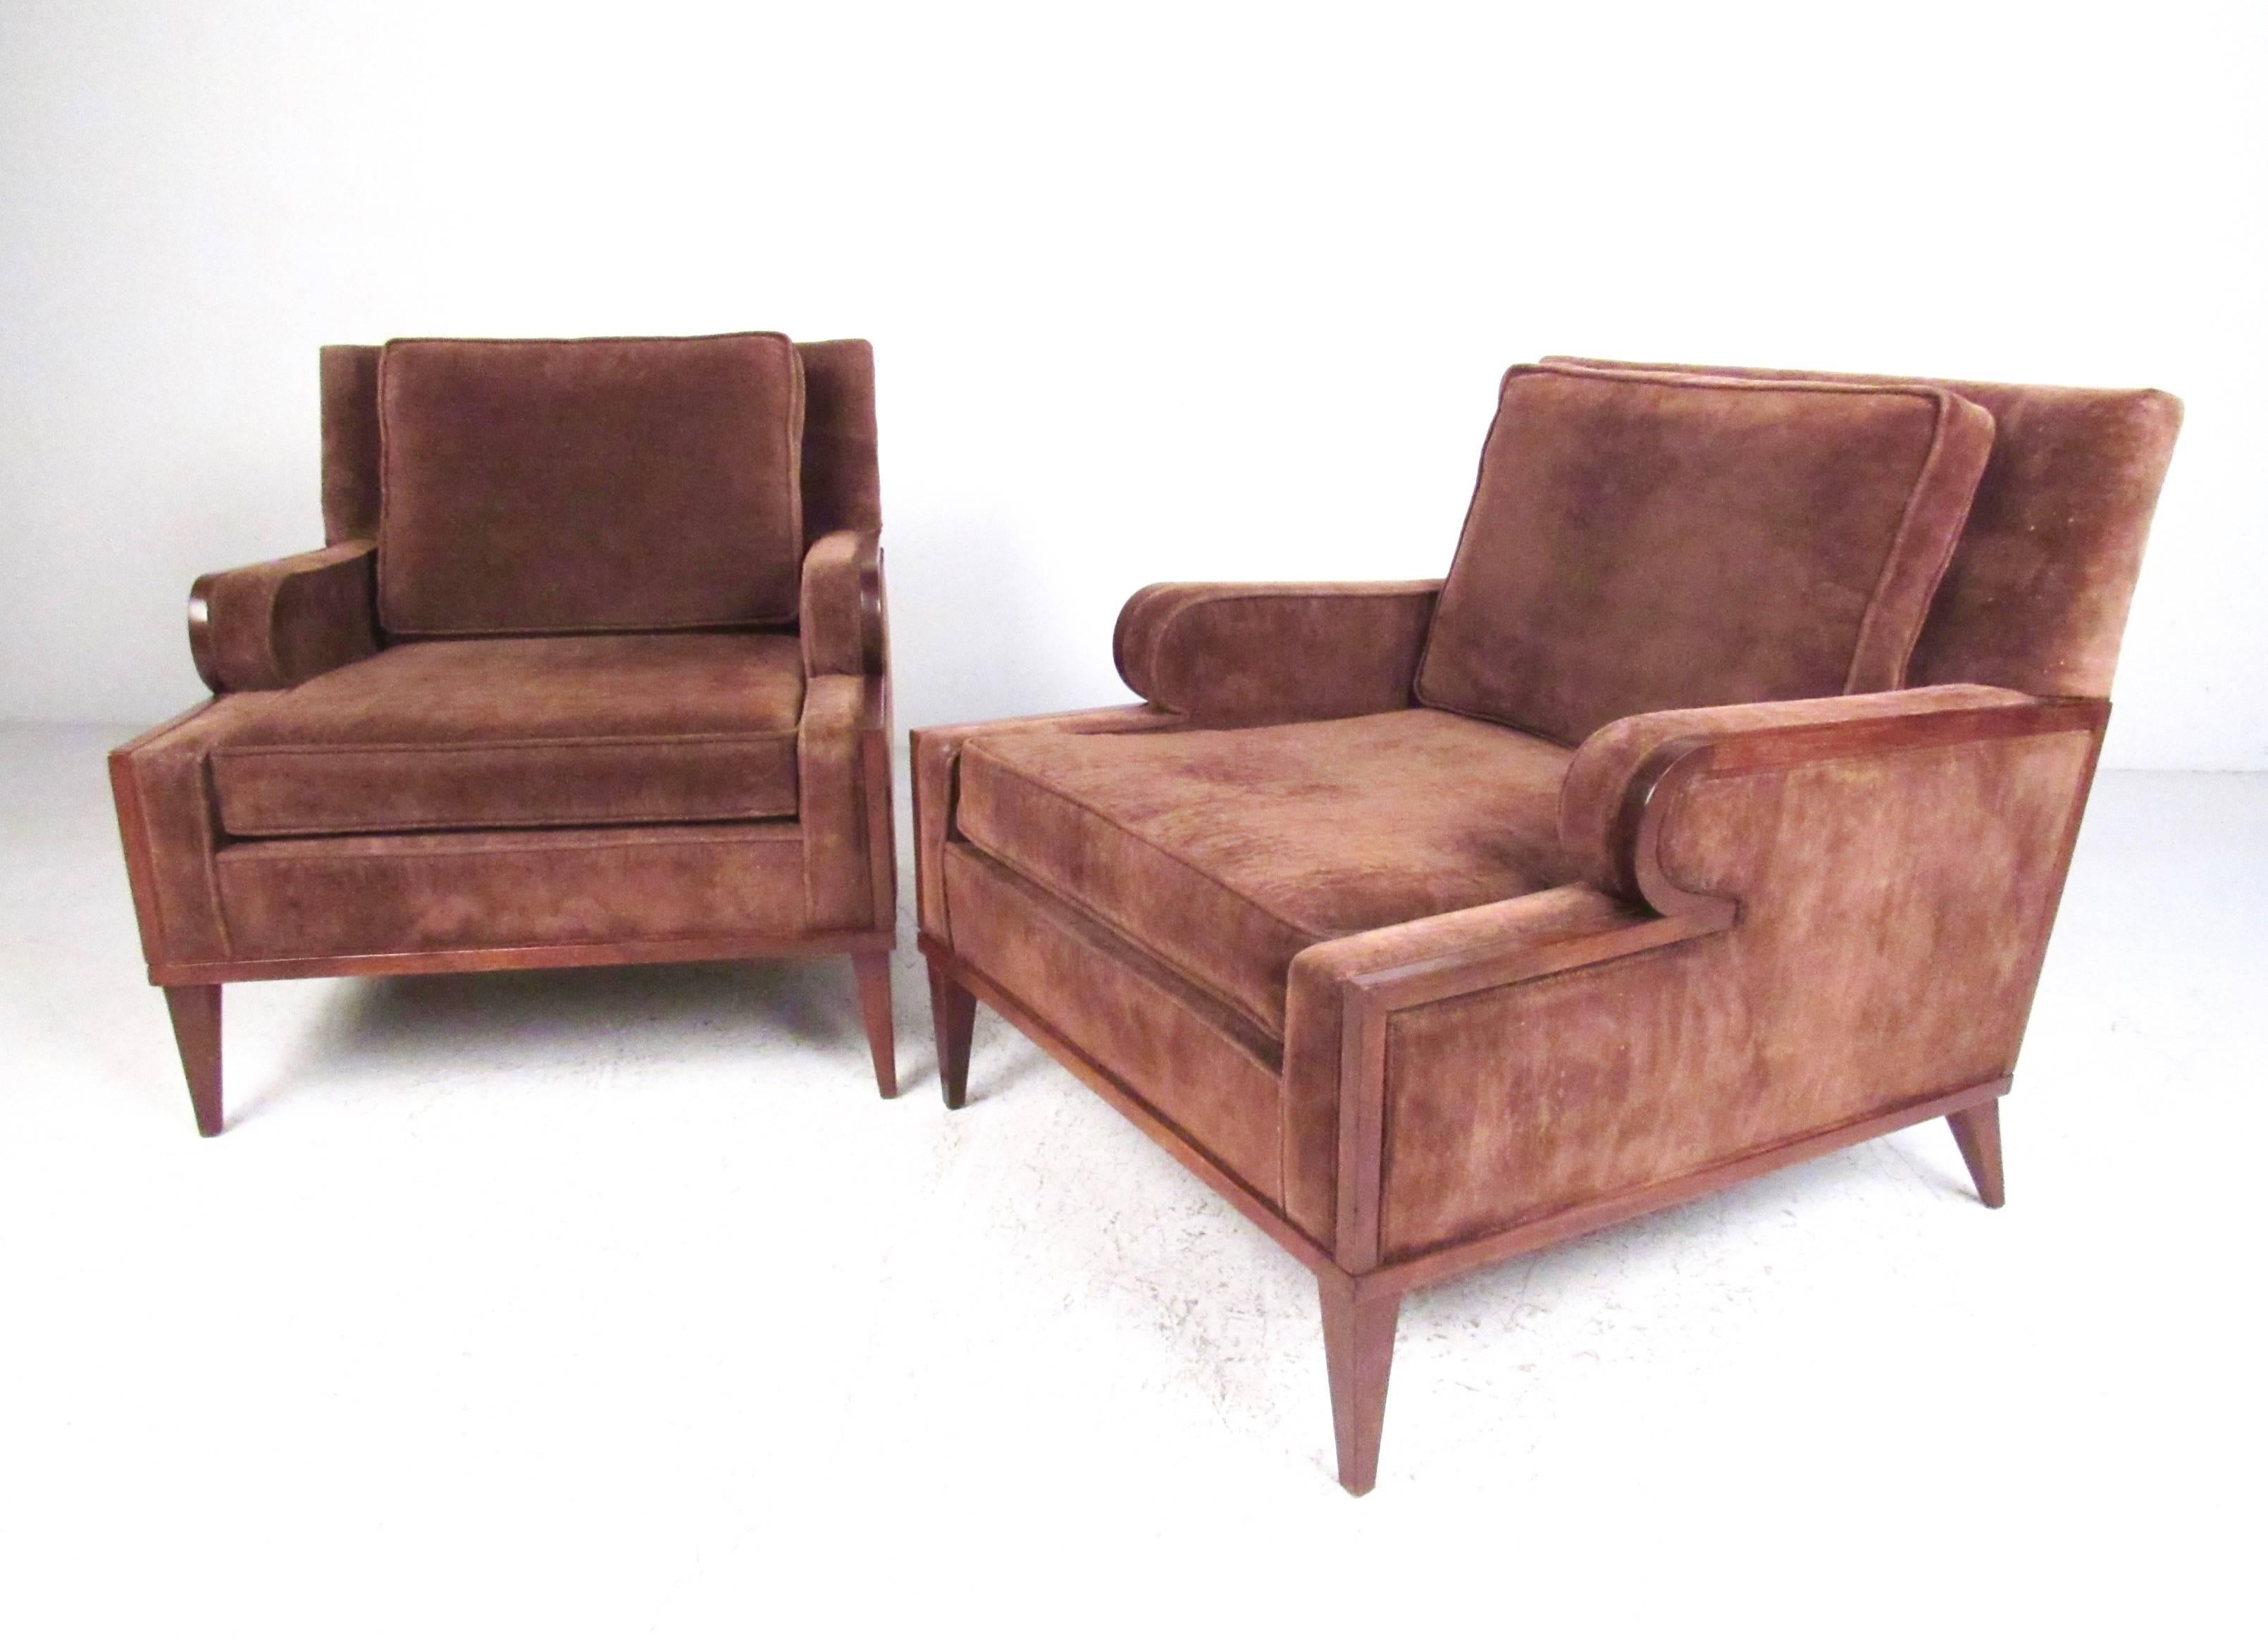 This stylish pair of vintage modern club chairs feature low profile armrests, tapered walnut frames, and wife, plush, upholstered seats. This beautiful matched set of lounge chairs make for an impressive addition to home or business seating area.